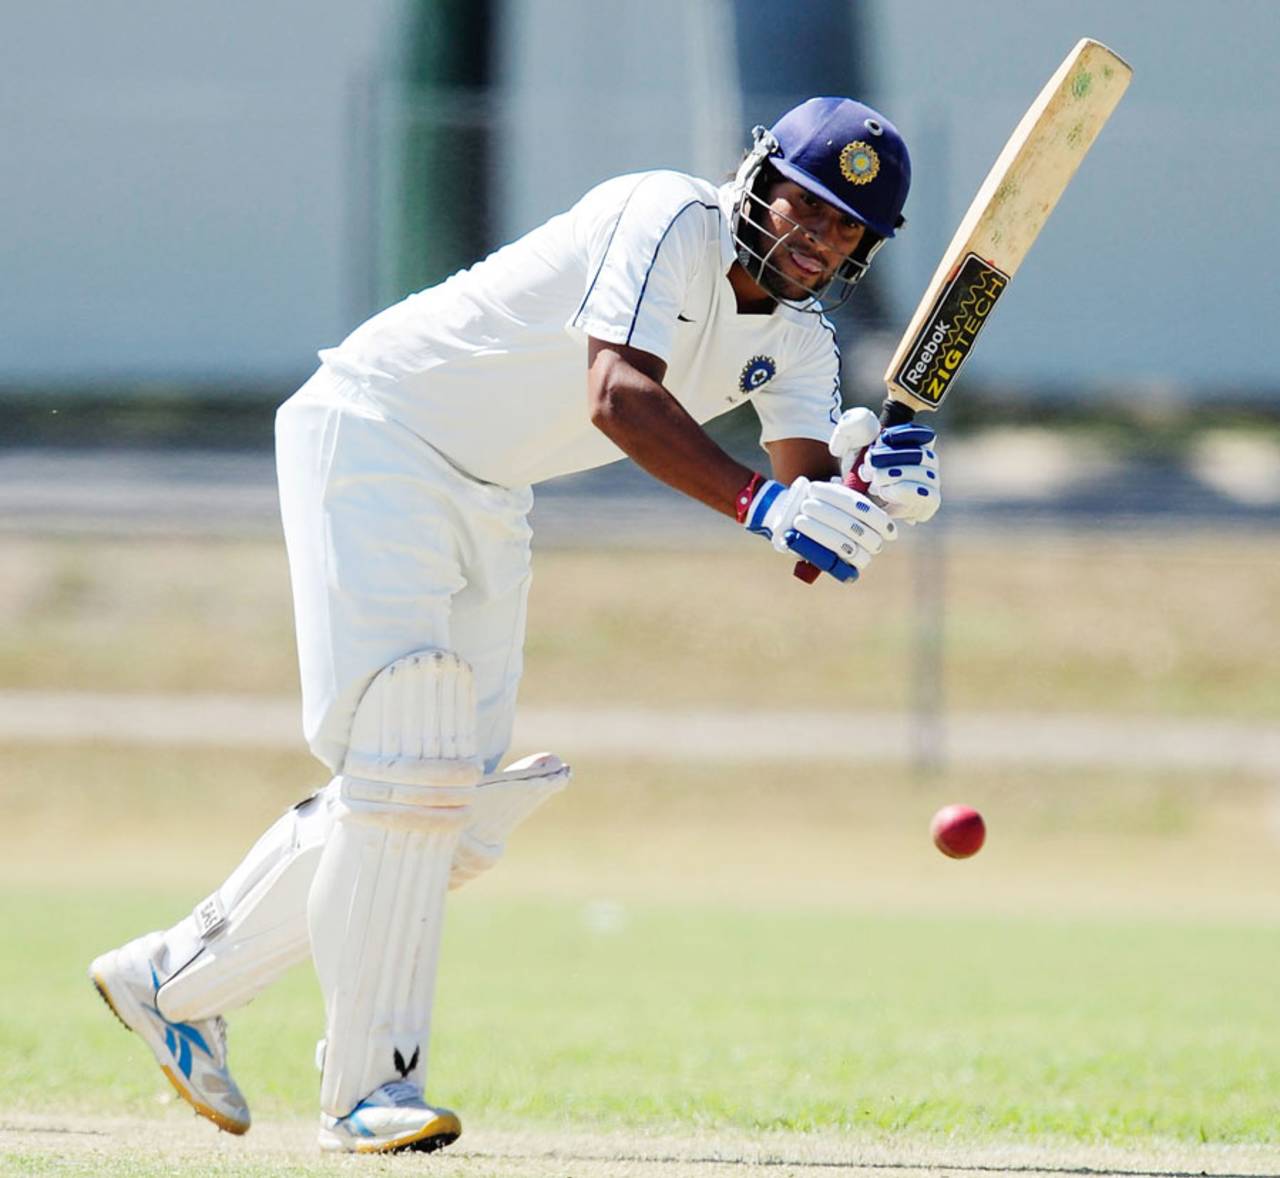 File photo - Saurabh Tiwary struck his third century of the season to lead Jharkhand to a promising position against Goa&nbsp;&nbsp;&bull;&nbsp;&nbsp;Getty Images